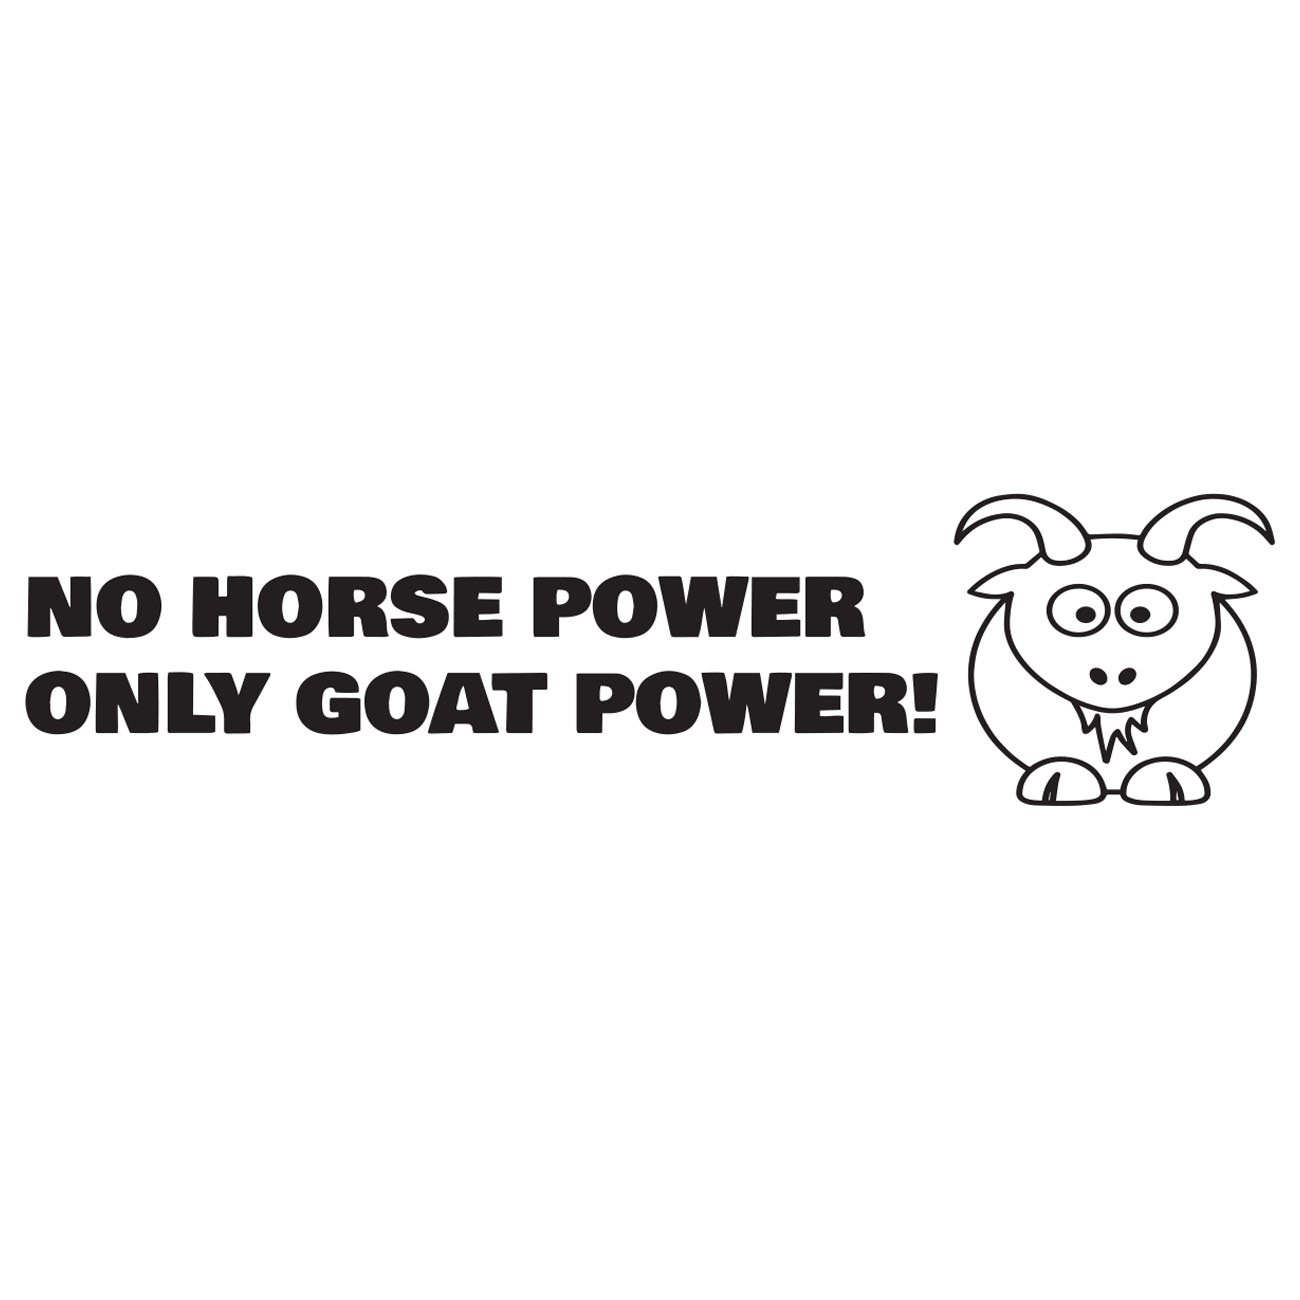 No horse power - Only goat power